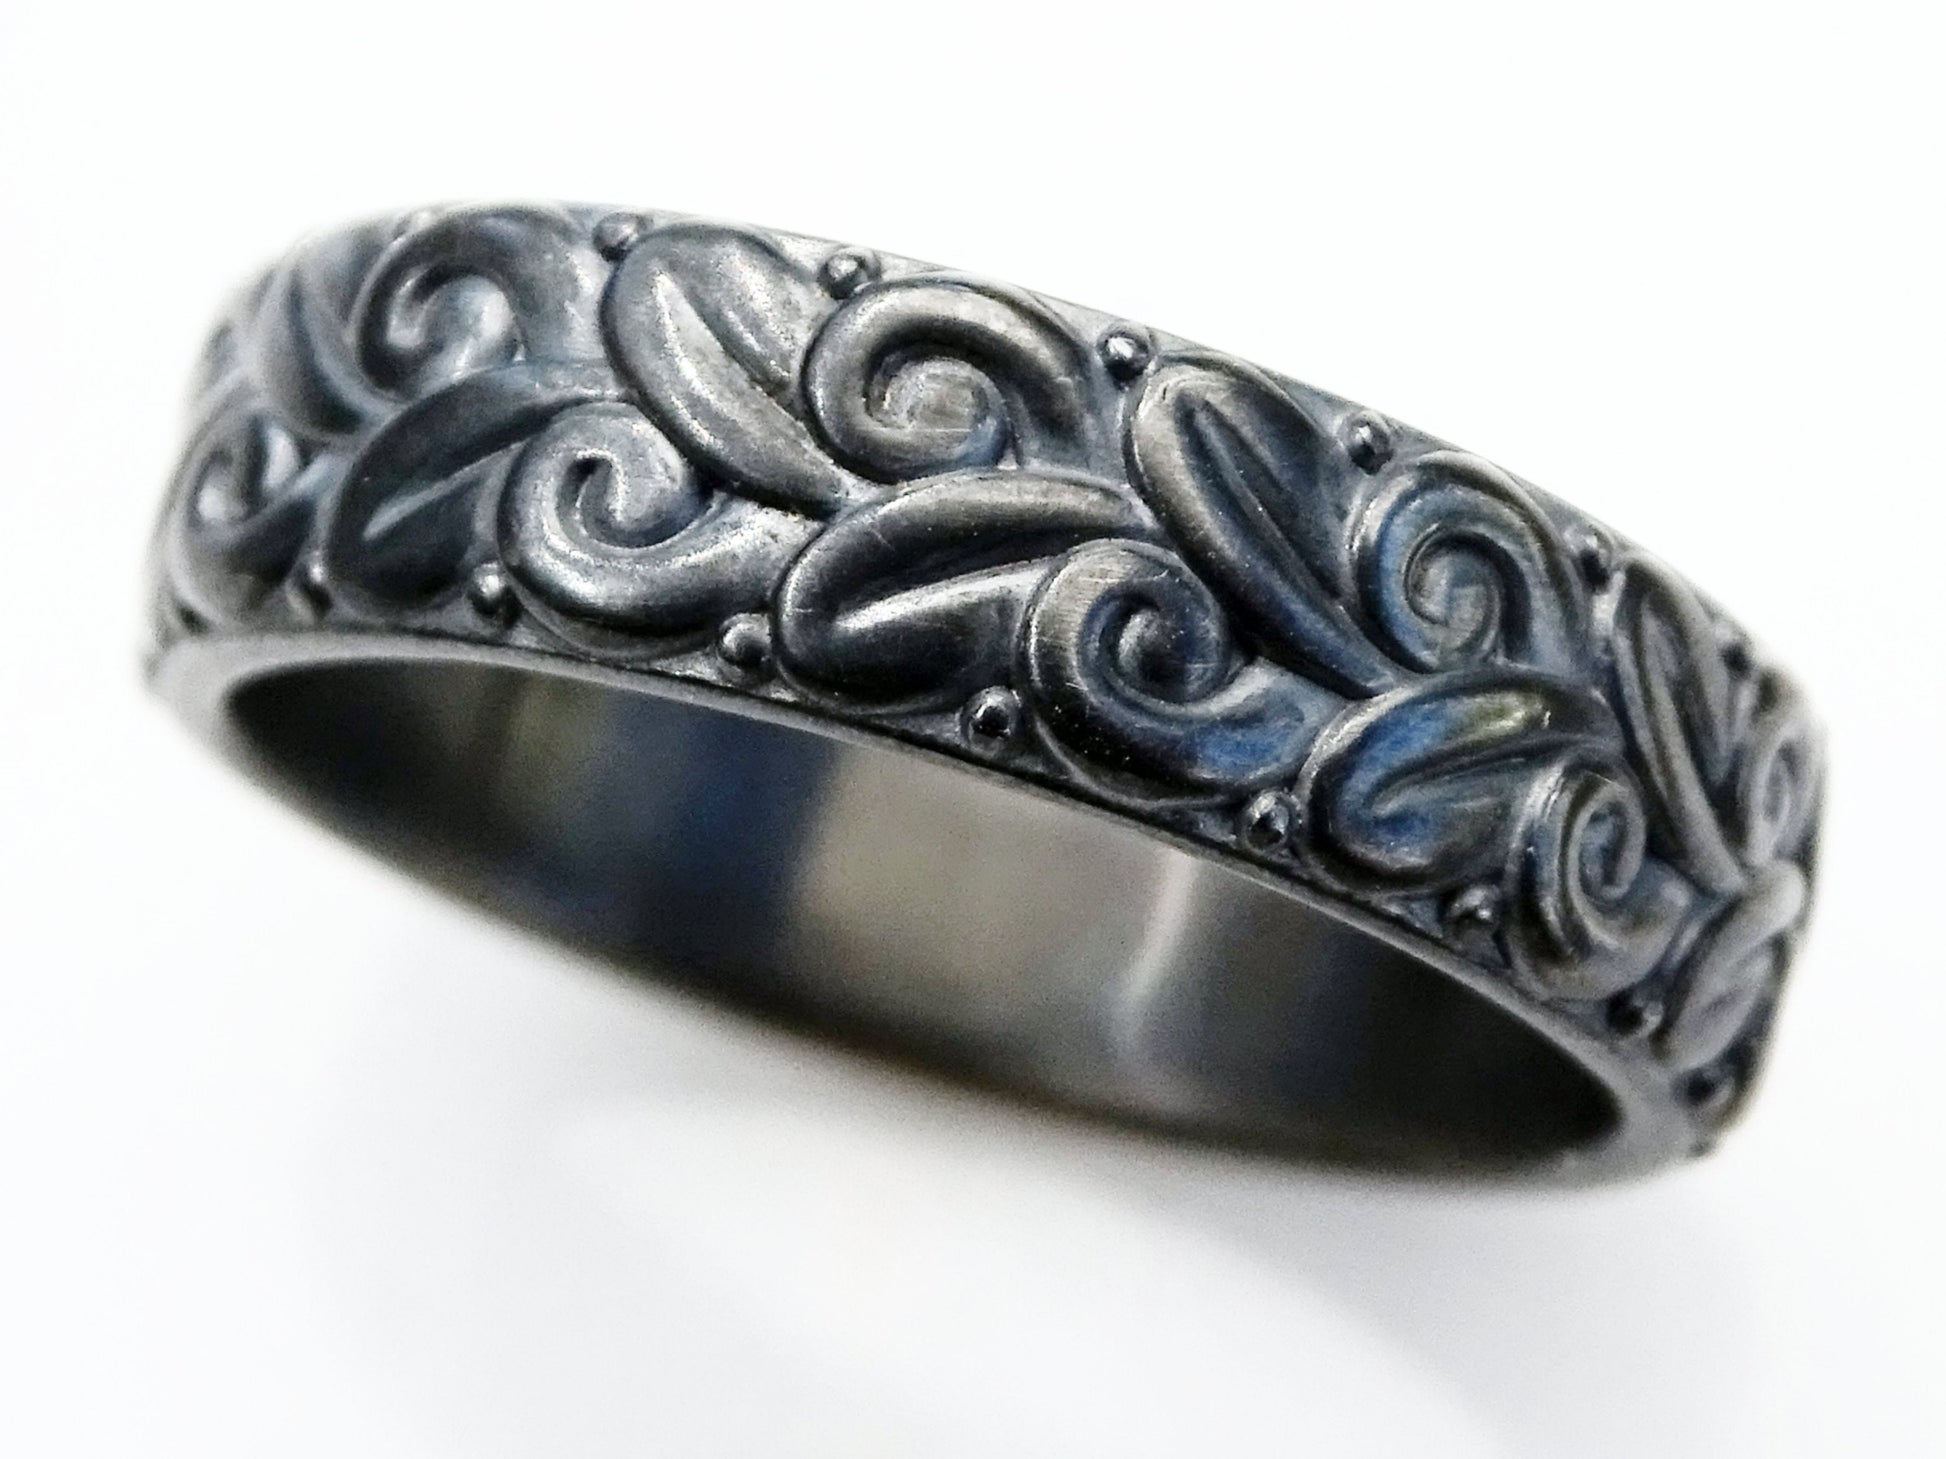 floral ring black silver, nature engagement ring silver, viking wedding ring men, sculped silver band, silver eternity ring, unique gift - CrazyAss Jewelry Designs